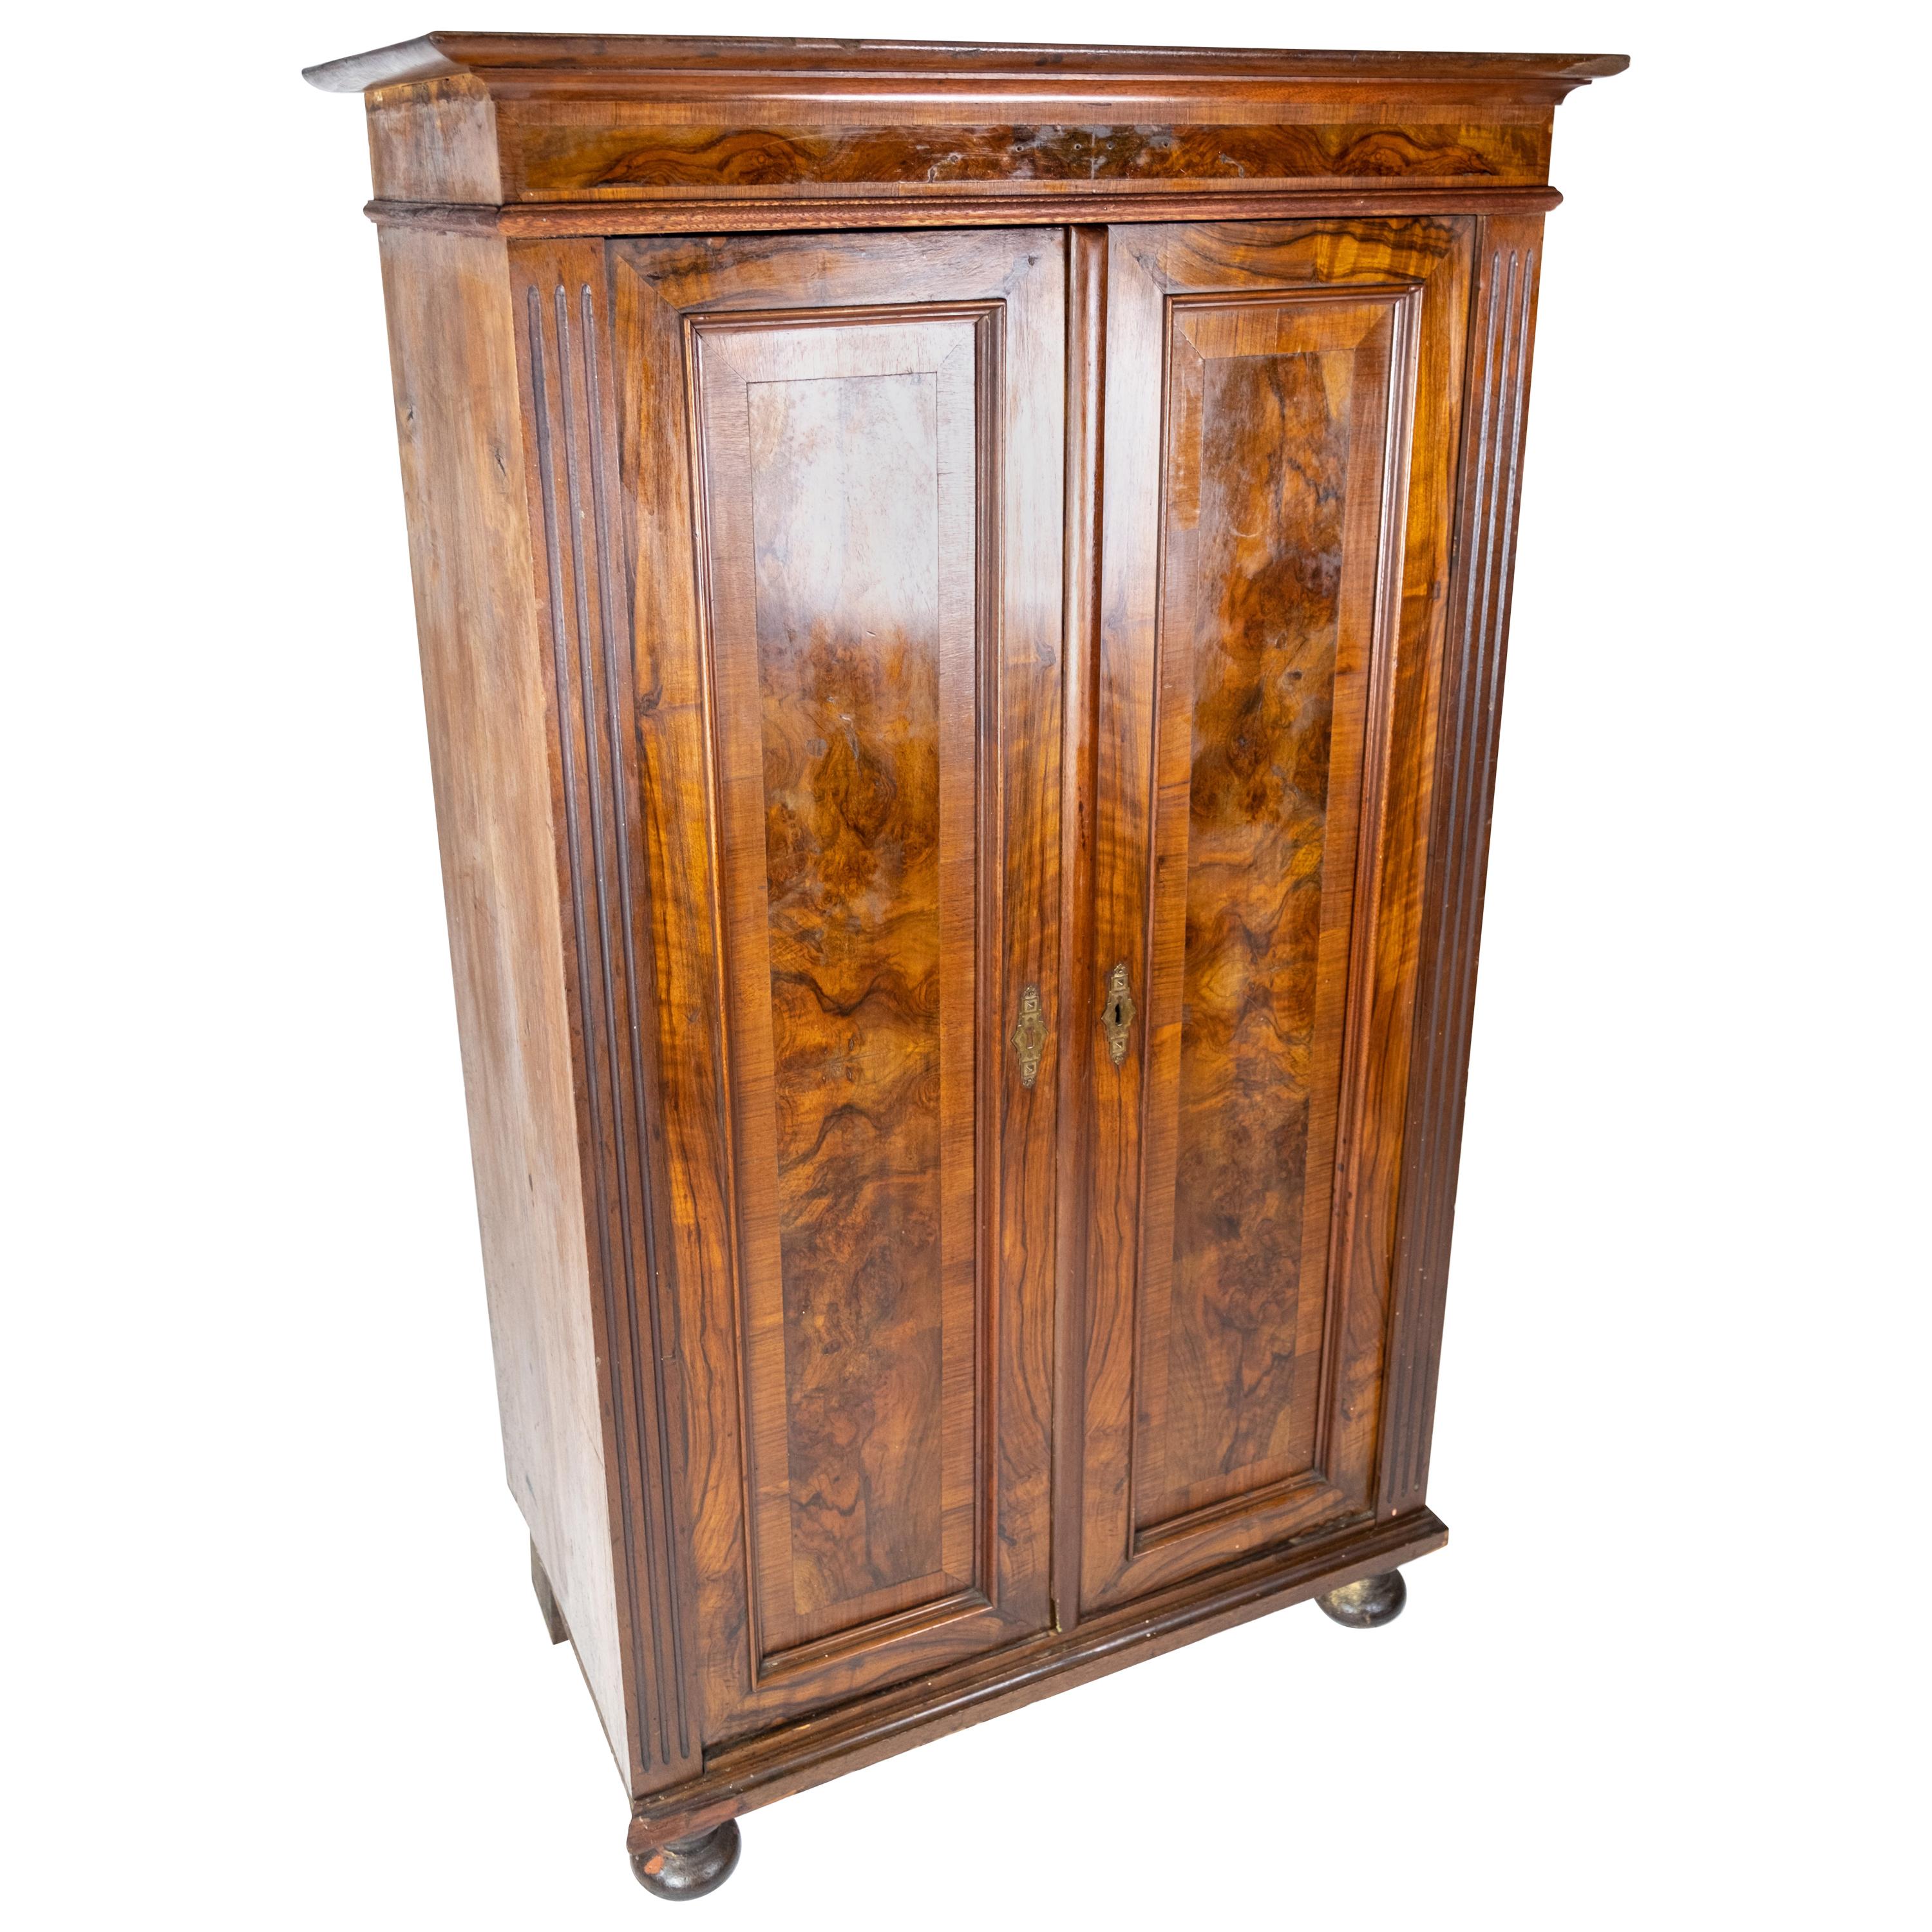 Cabinet of Walnut, in Great Antique Condition from the 1880s